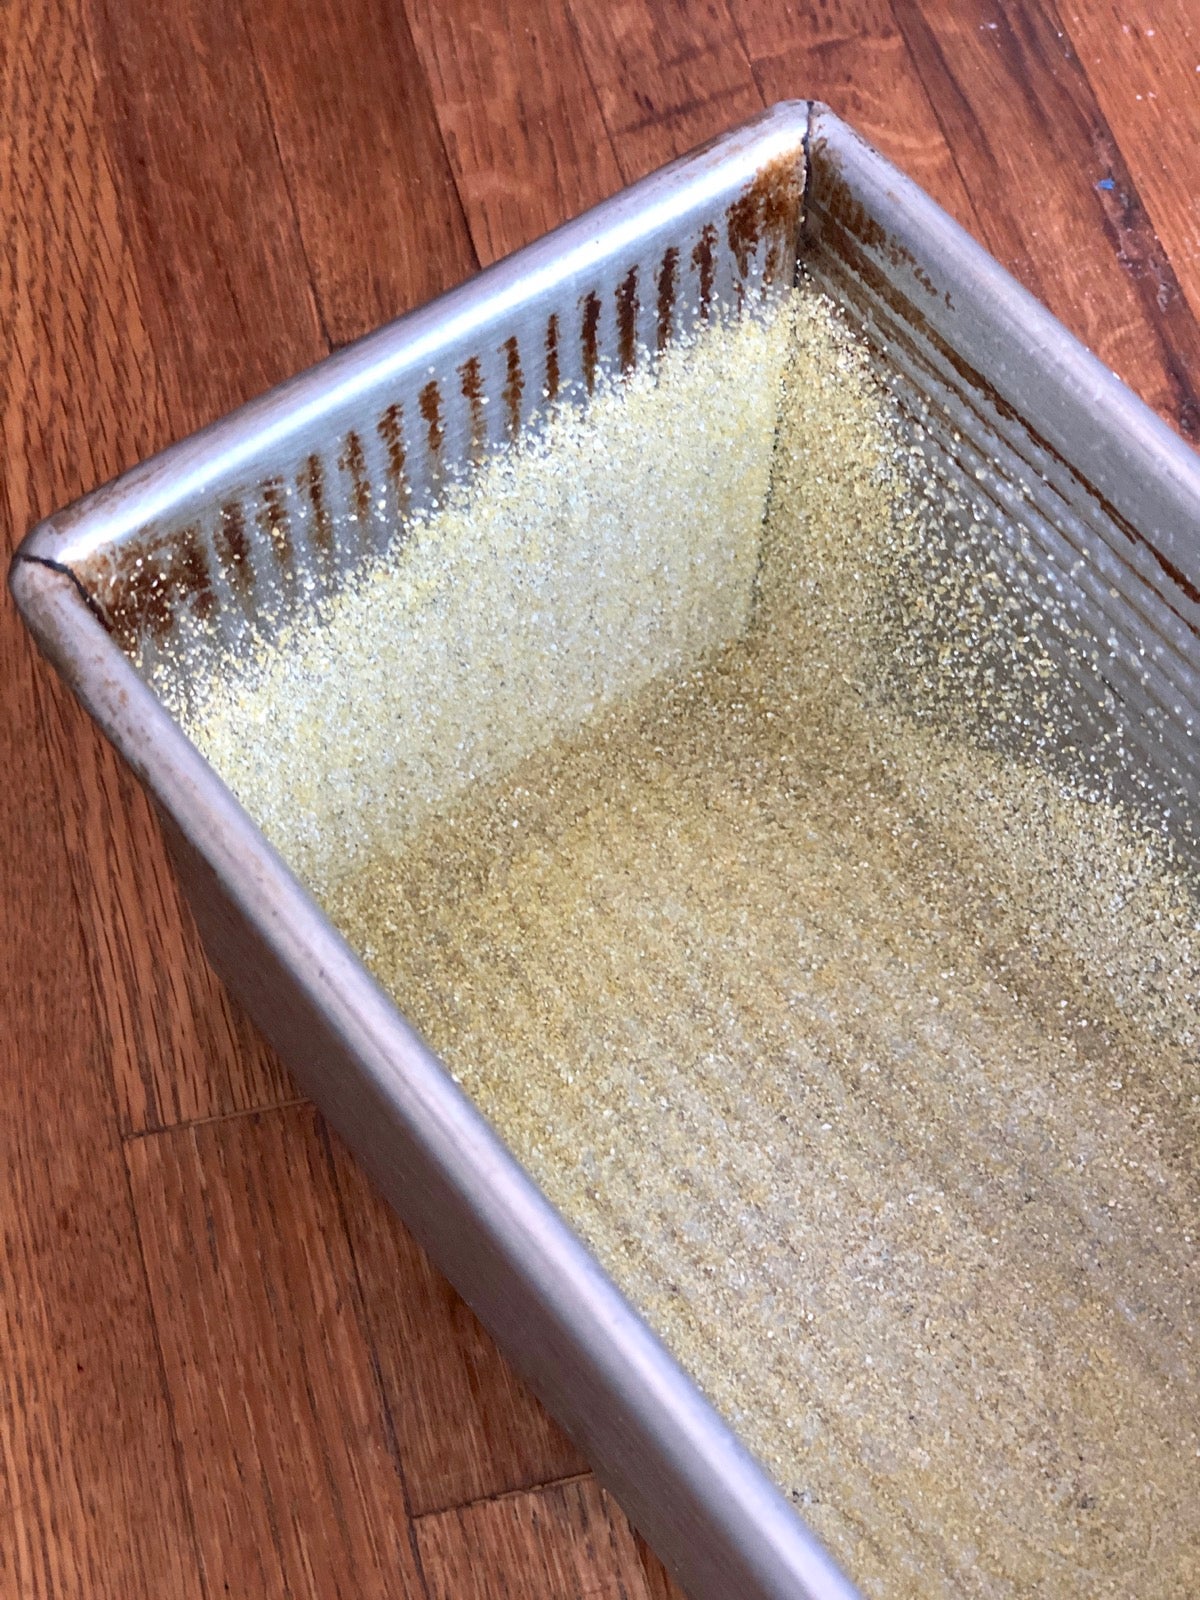 A 9" x 9" x 9" loaf pan, looking down from above to see its straight sides and a heavy dusting of cornmeal in its interior.